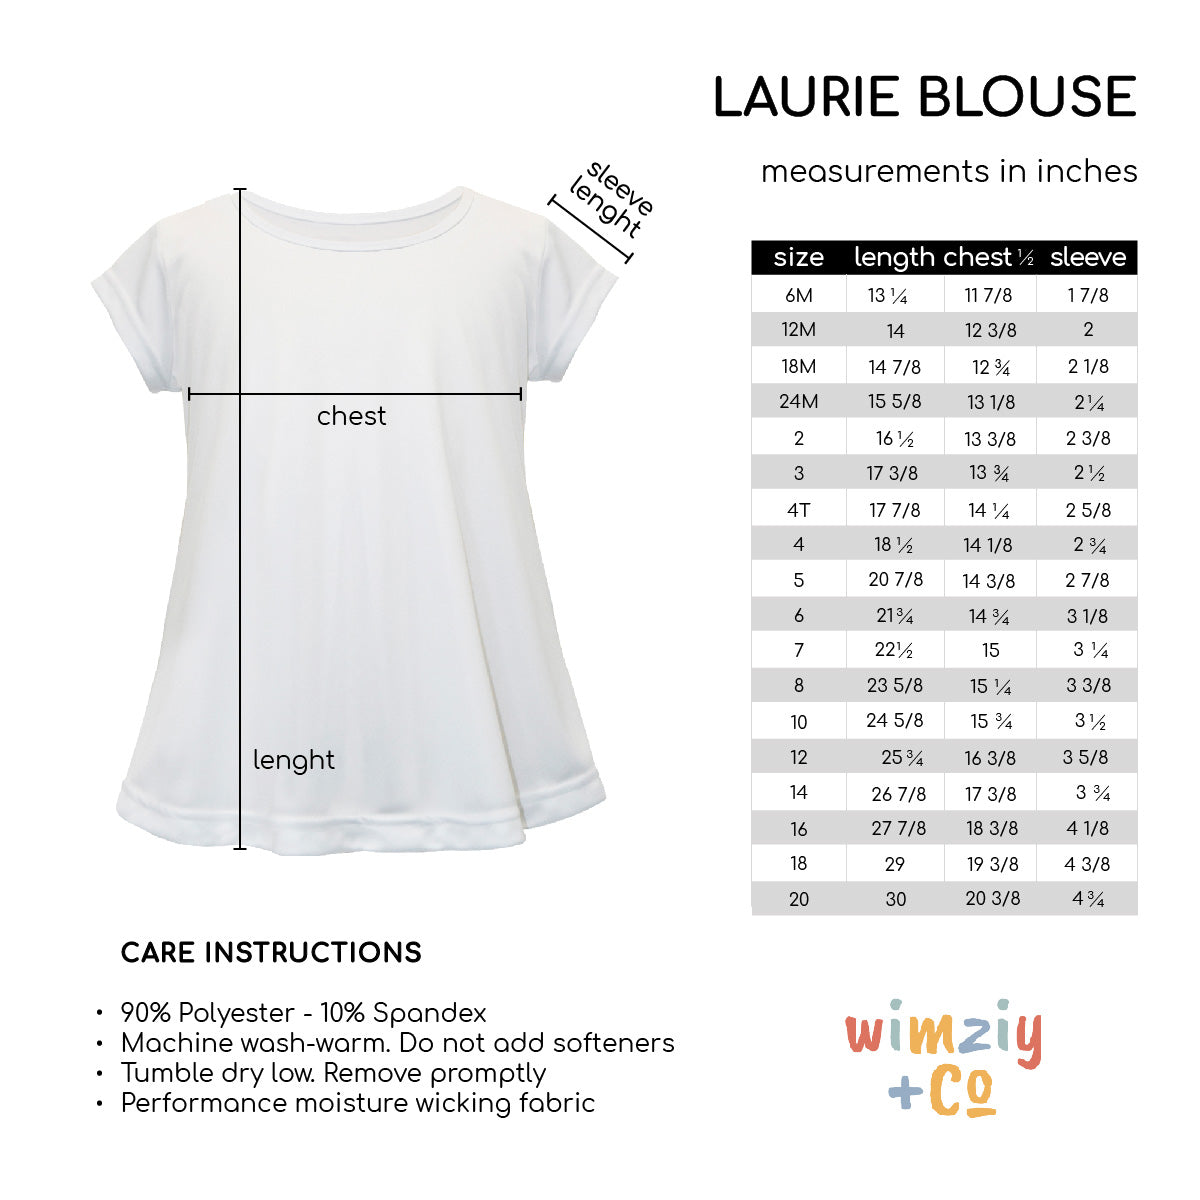 Silhouette Cheer Monogram White Short Sleeve Laurie Top - Wimziy&Co.